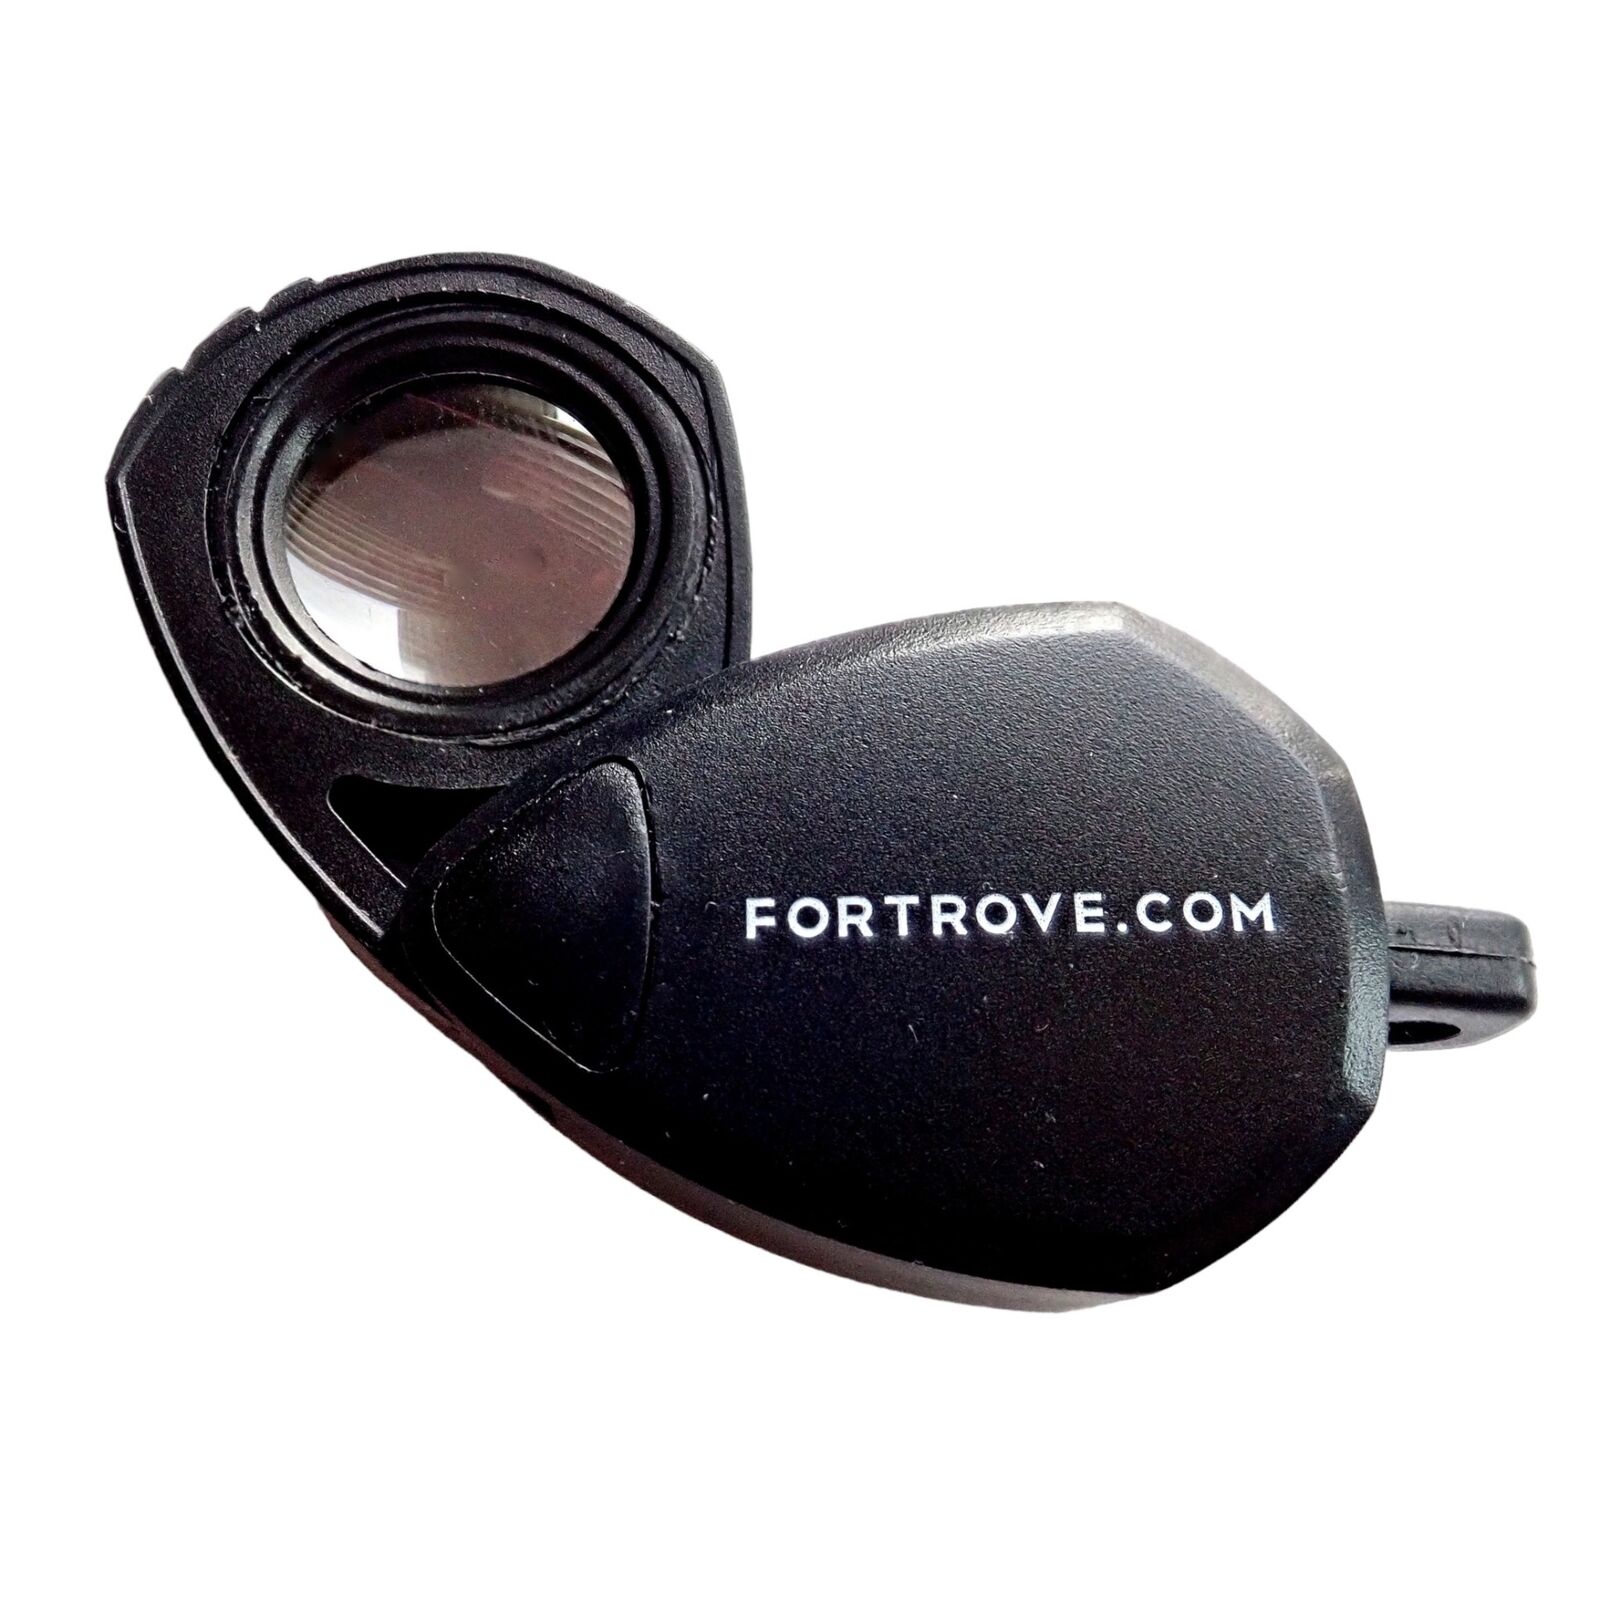 Fortrove Jewelry & Watches:Jewelry Care, Design & Repair:Jewelry Tools & Workbenches Special Edition 20x Fortrove.com Magnifier Jewelers Folding Glass Loupe